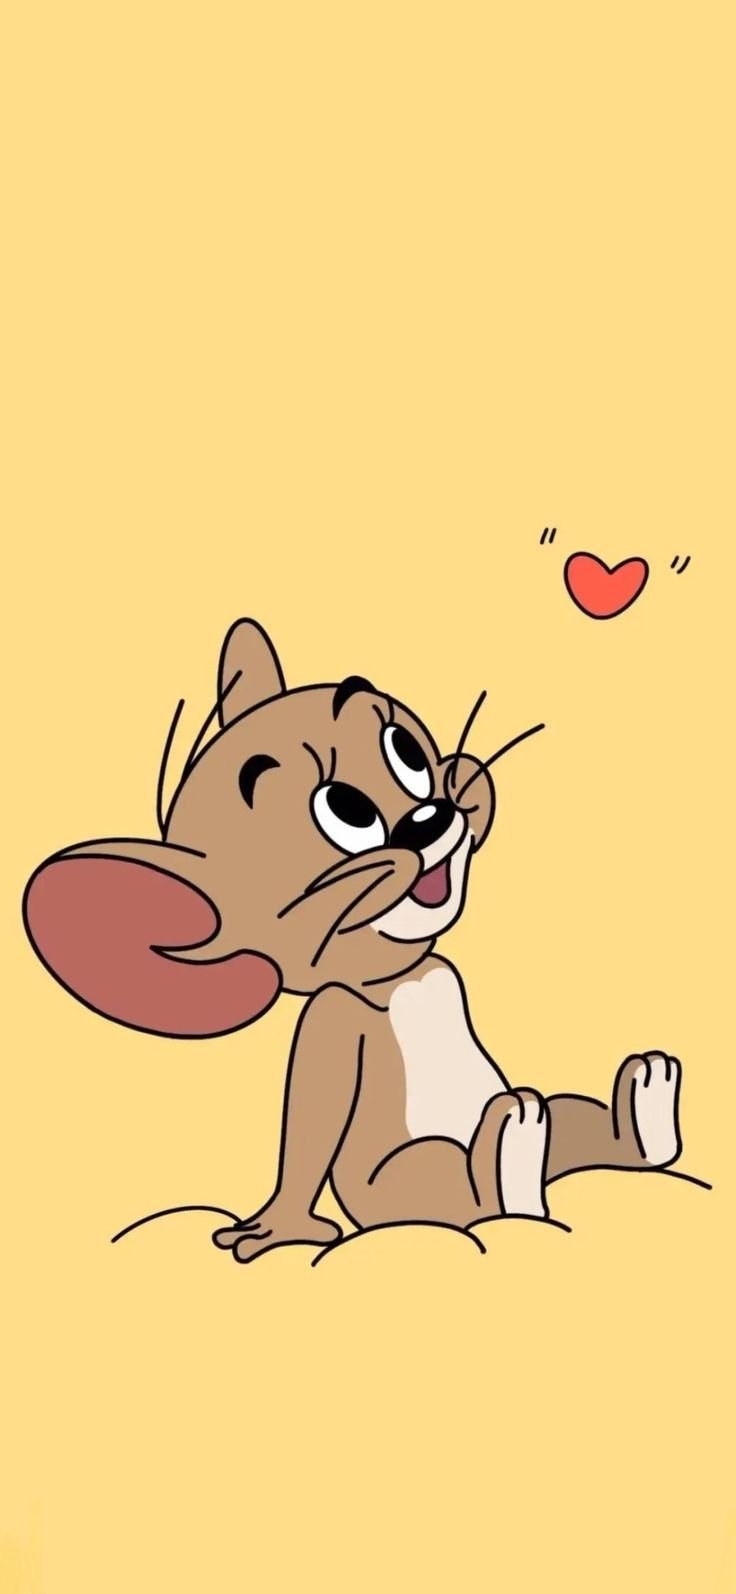 100+] Jerry Mouse Wallpapers | Wallpapers.com